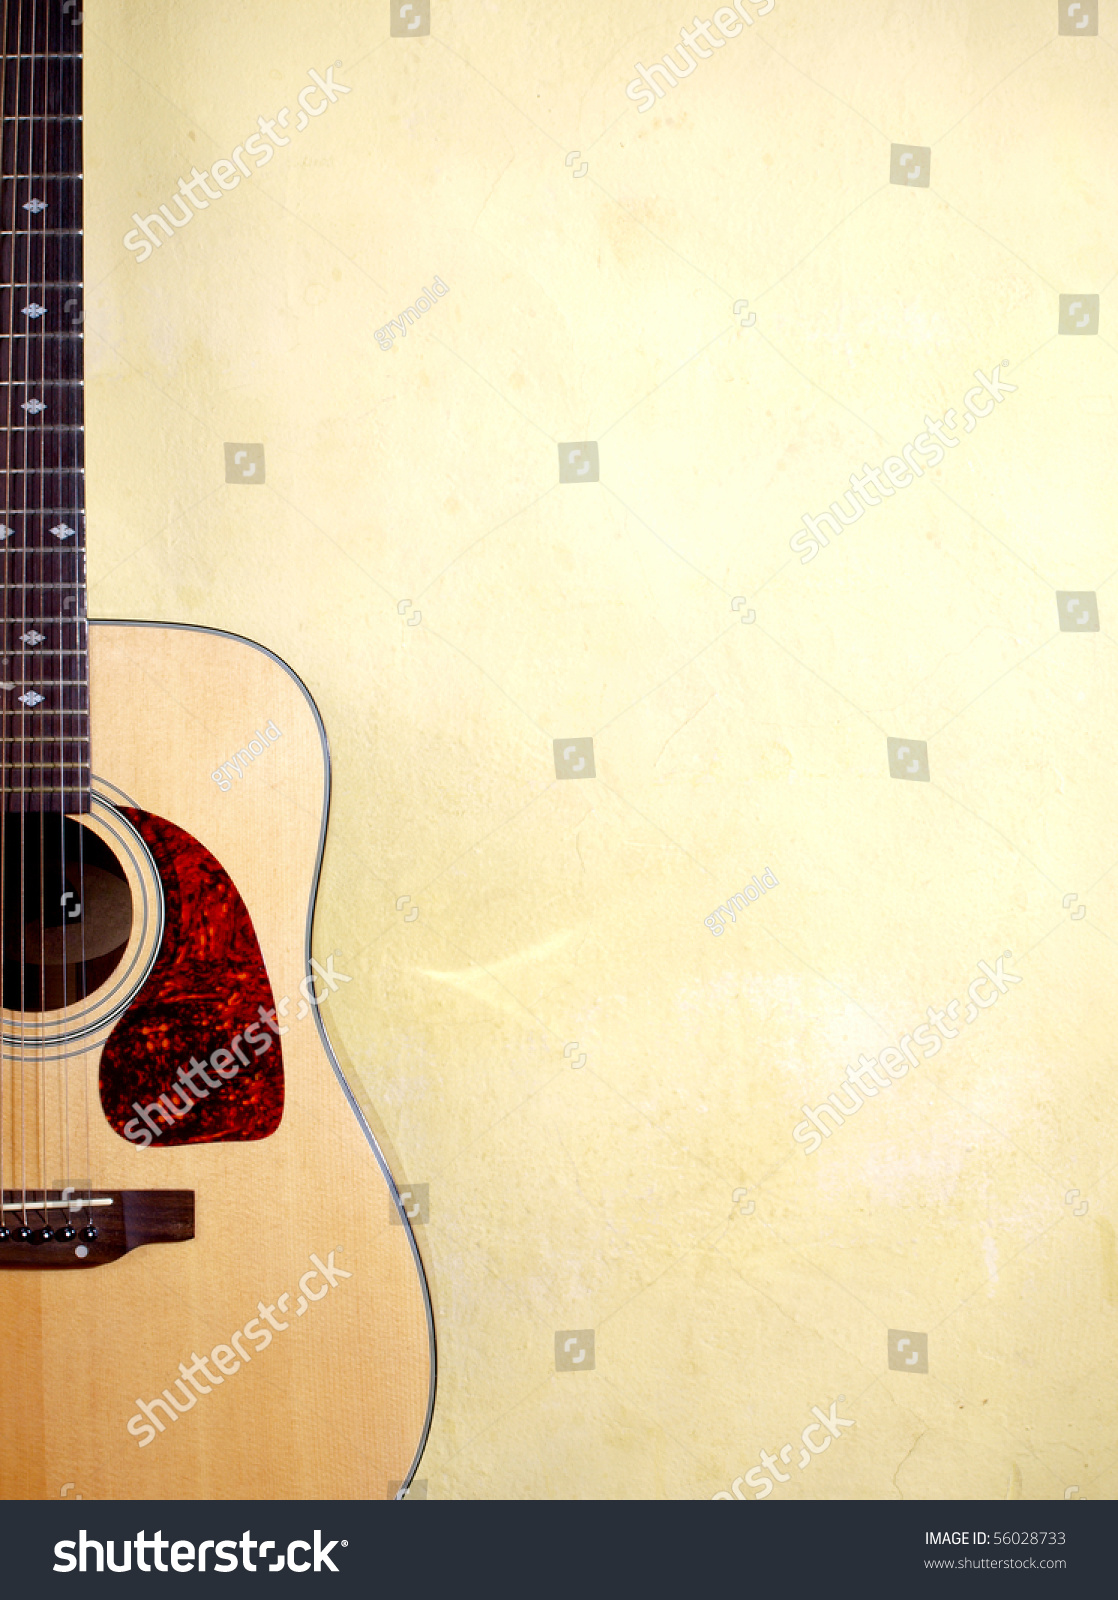 Color photo of an acoustic guitar near wall #56028733